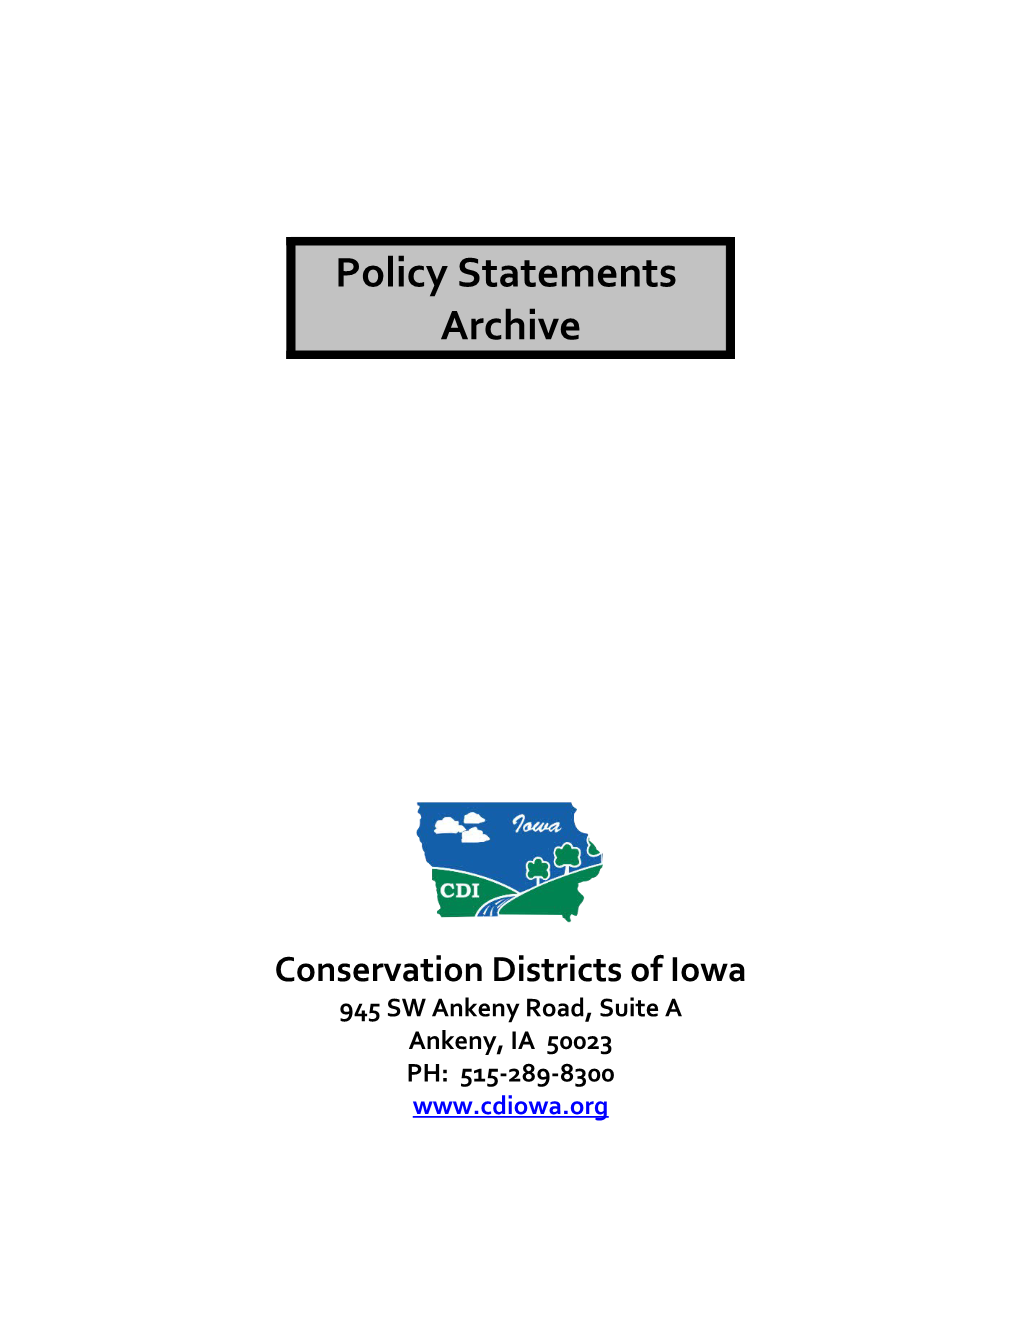 Association Policy Statements